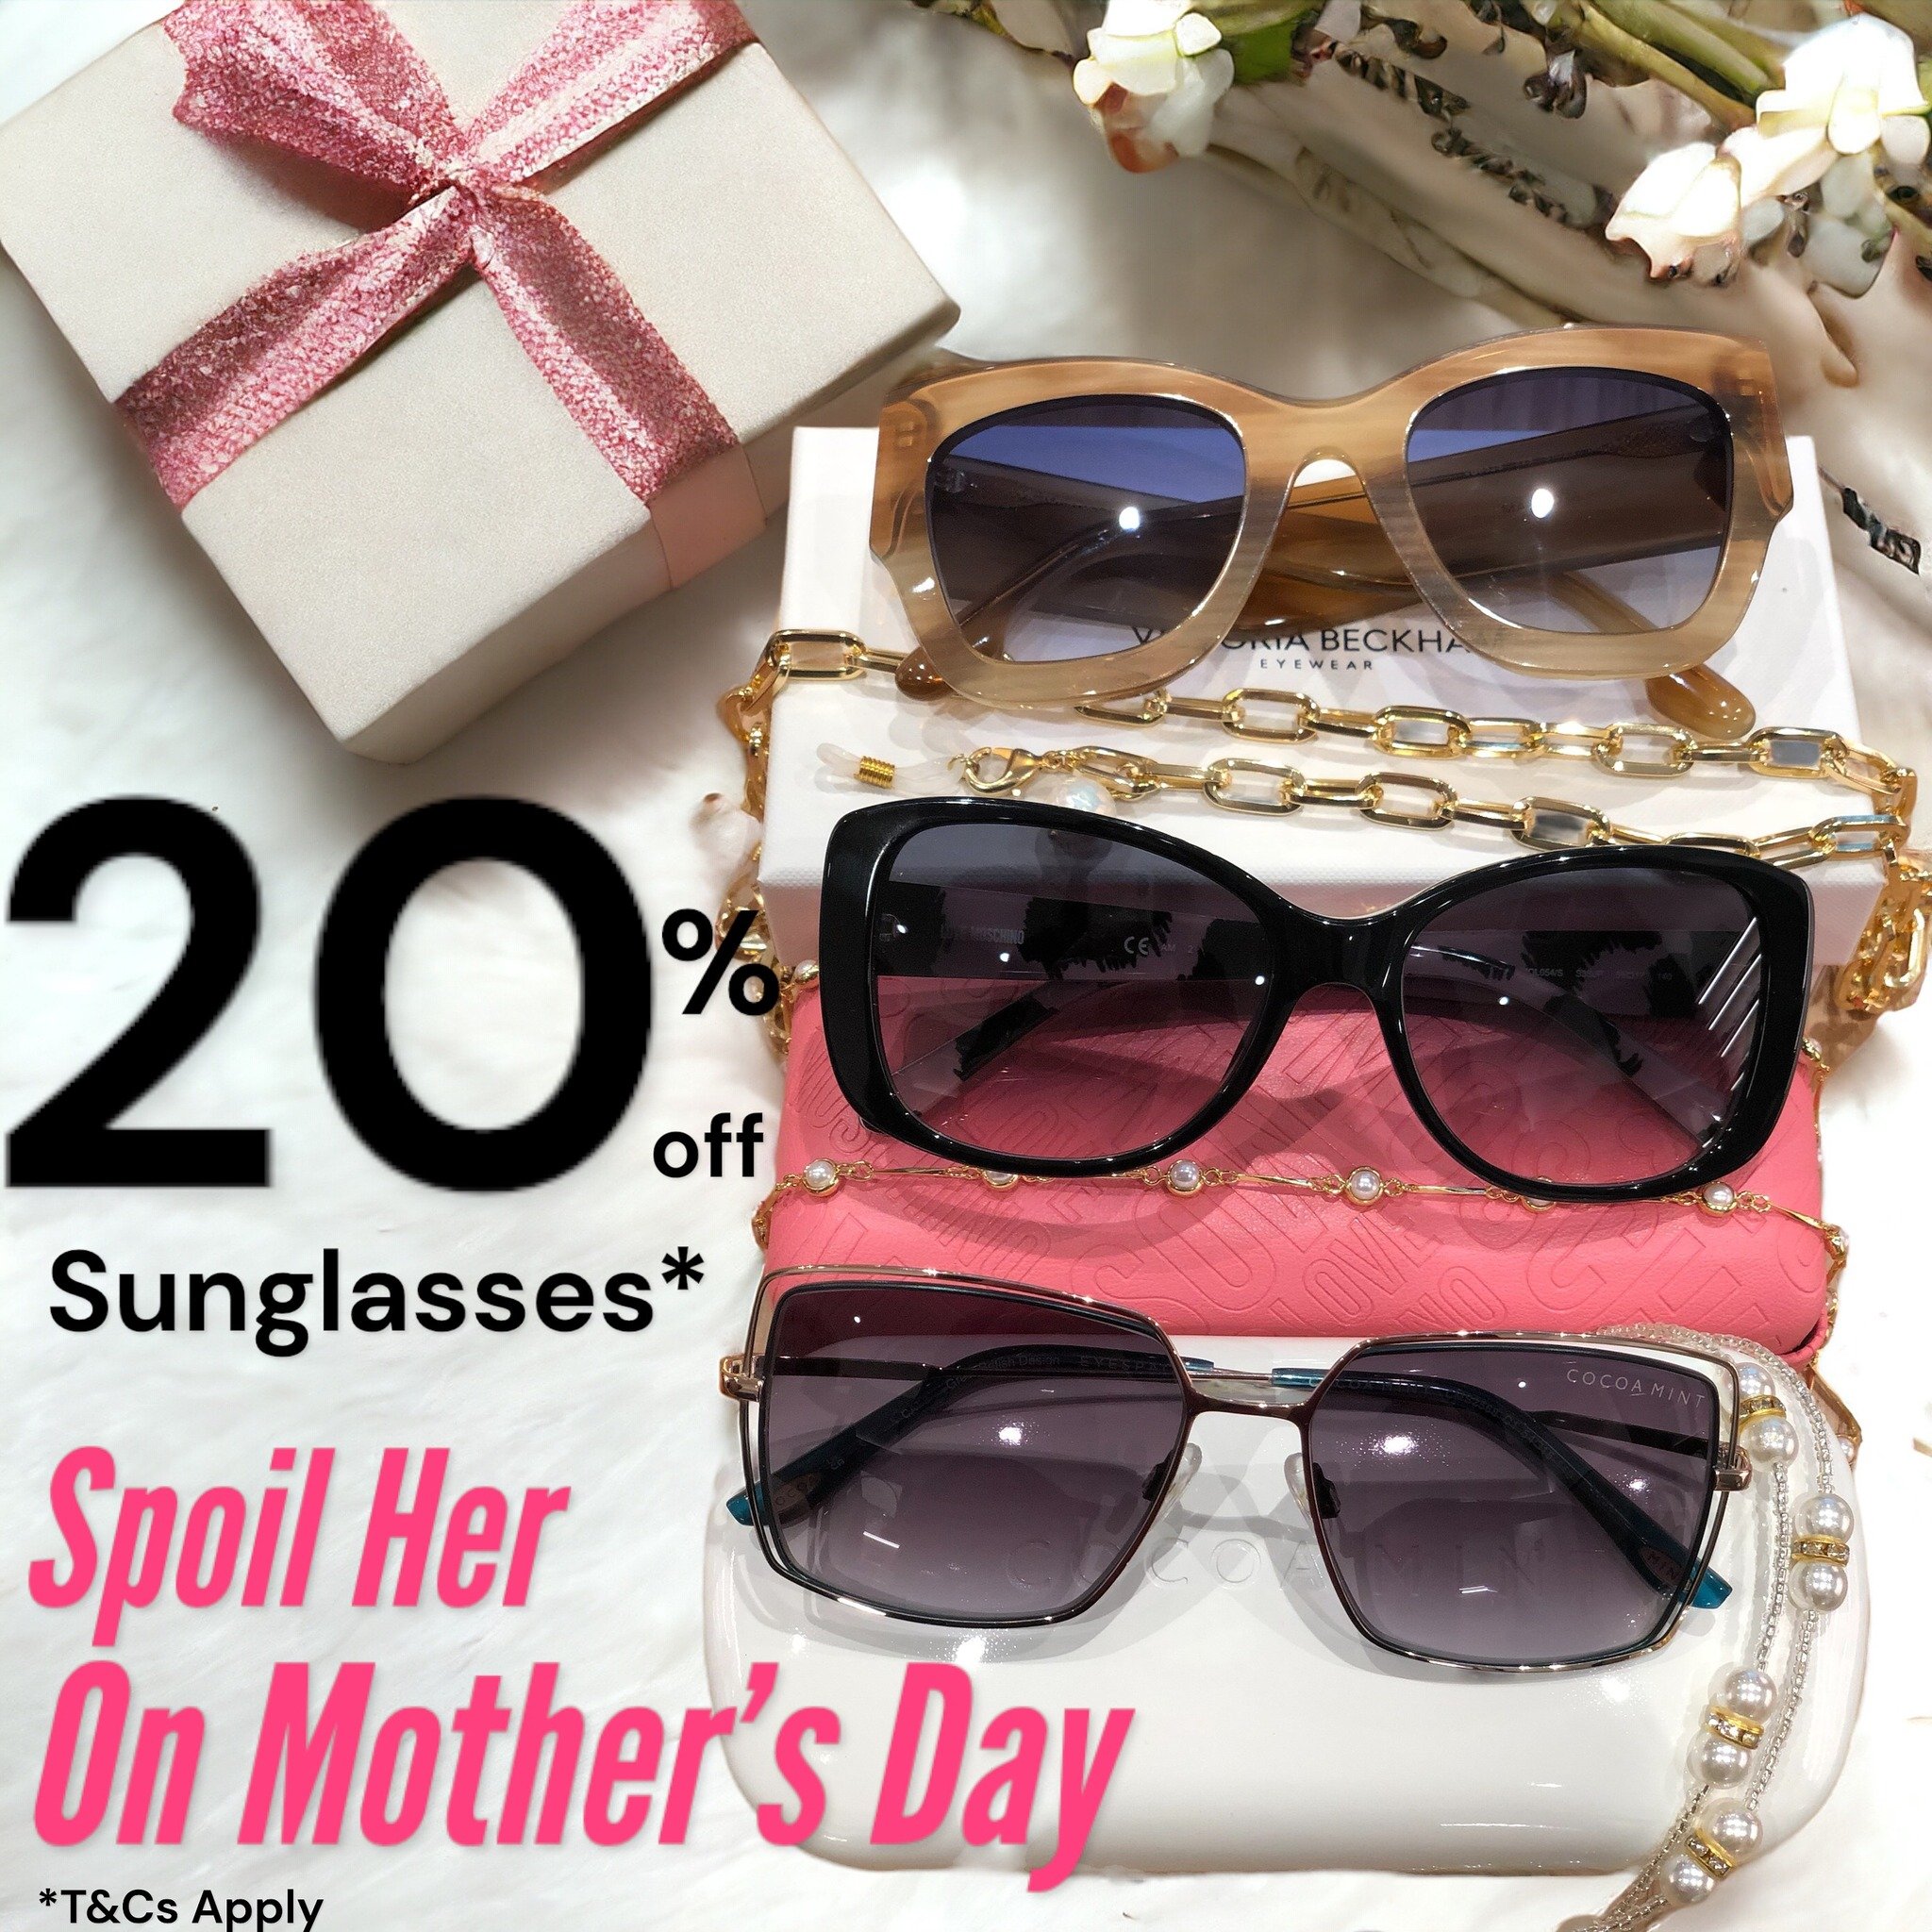 Pamper her this Mother&rsquo;s Day with a dazzling array of chic sunglasses from Eyeris Optometrist💝 #safiloeyewear #aaronseyewear #marchoneyewear #cocoamint #victoriabeckhamsunglasses #lovemoschinosunglasses 
#gungahlinmarketplace